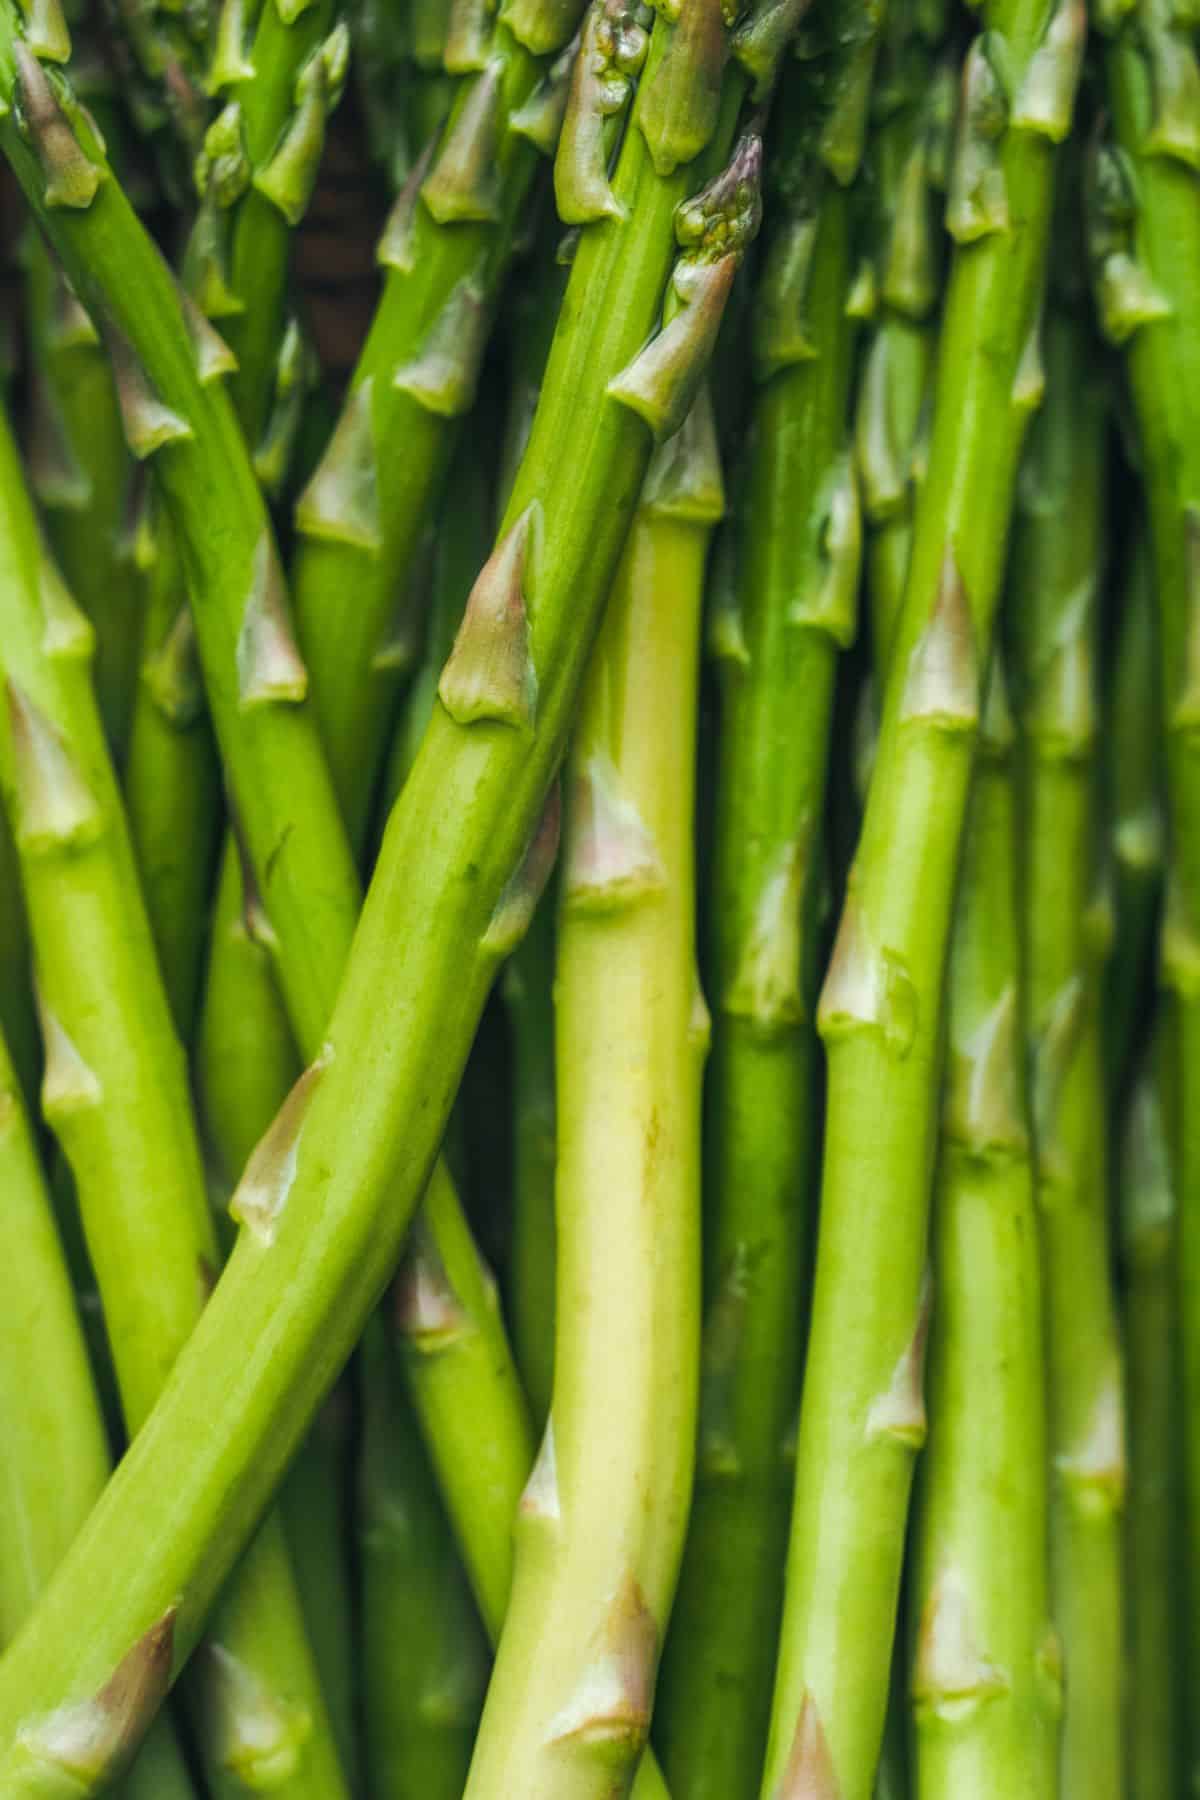 Close-up of a bundle of fresh green asparagus stalks ready for cooking.